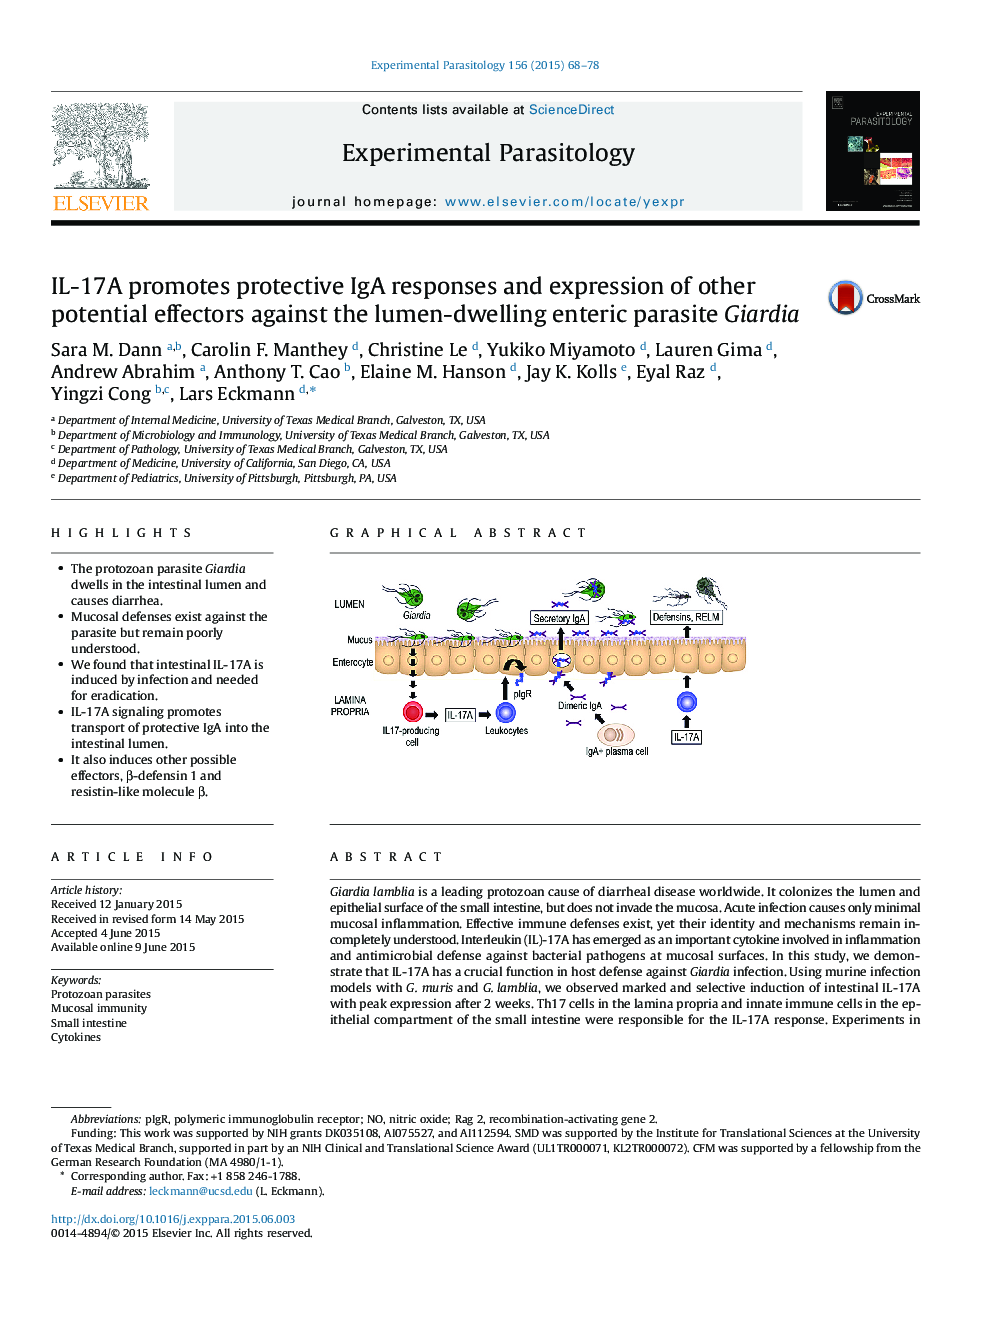 IL-17A promotes protective IgA responses and expression of other potential effectors against the lumen-dwelling enteric parasite Giardia